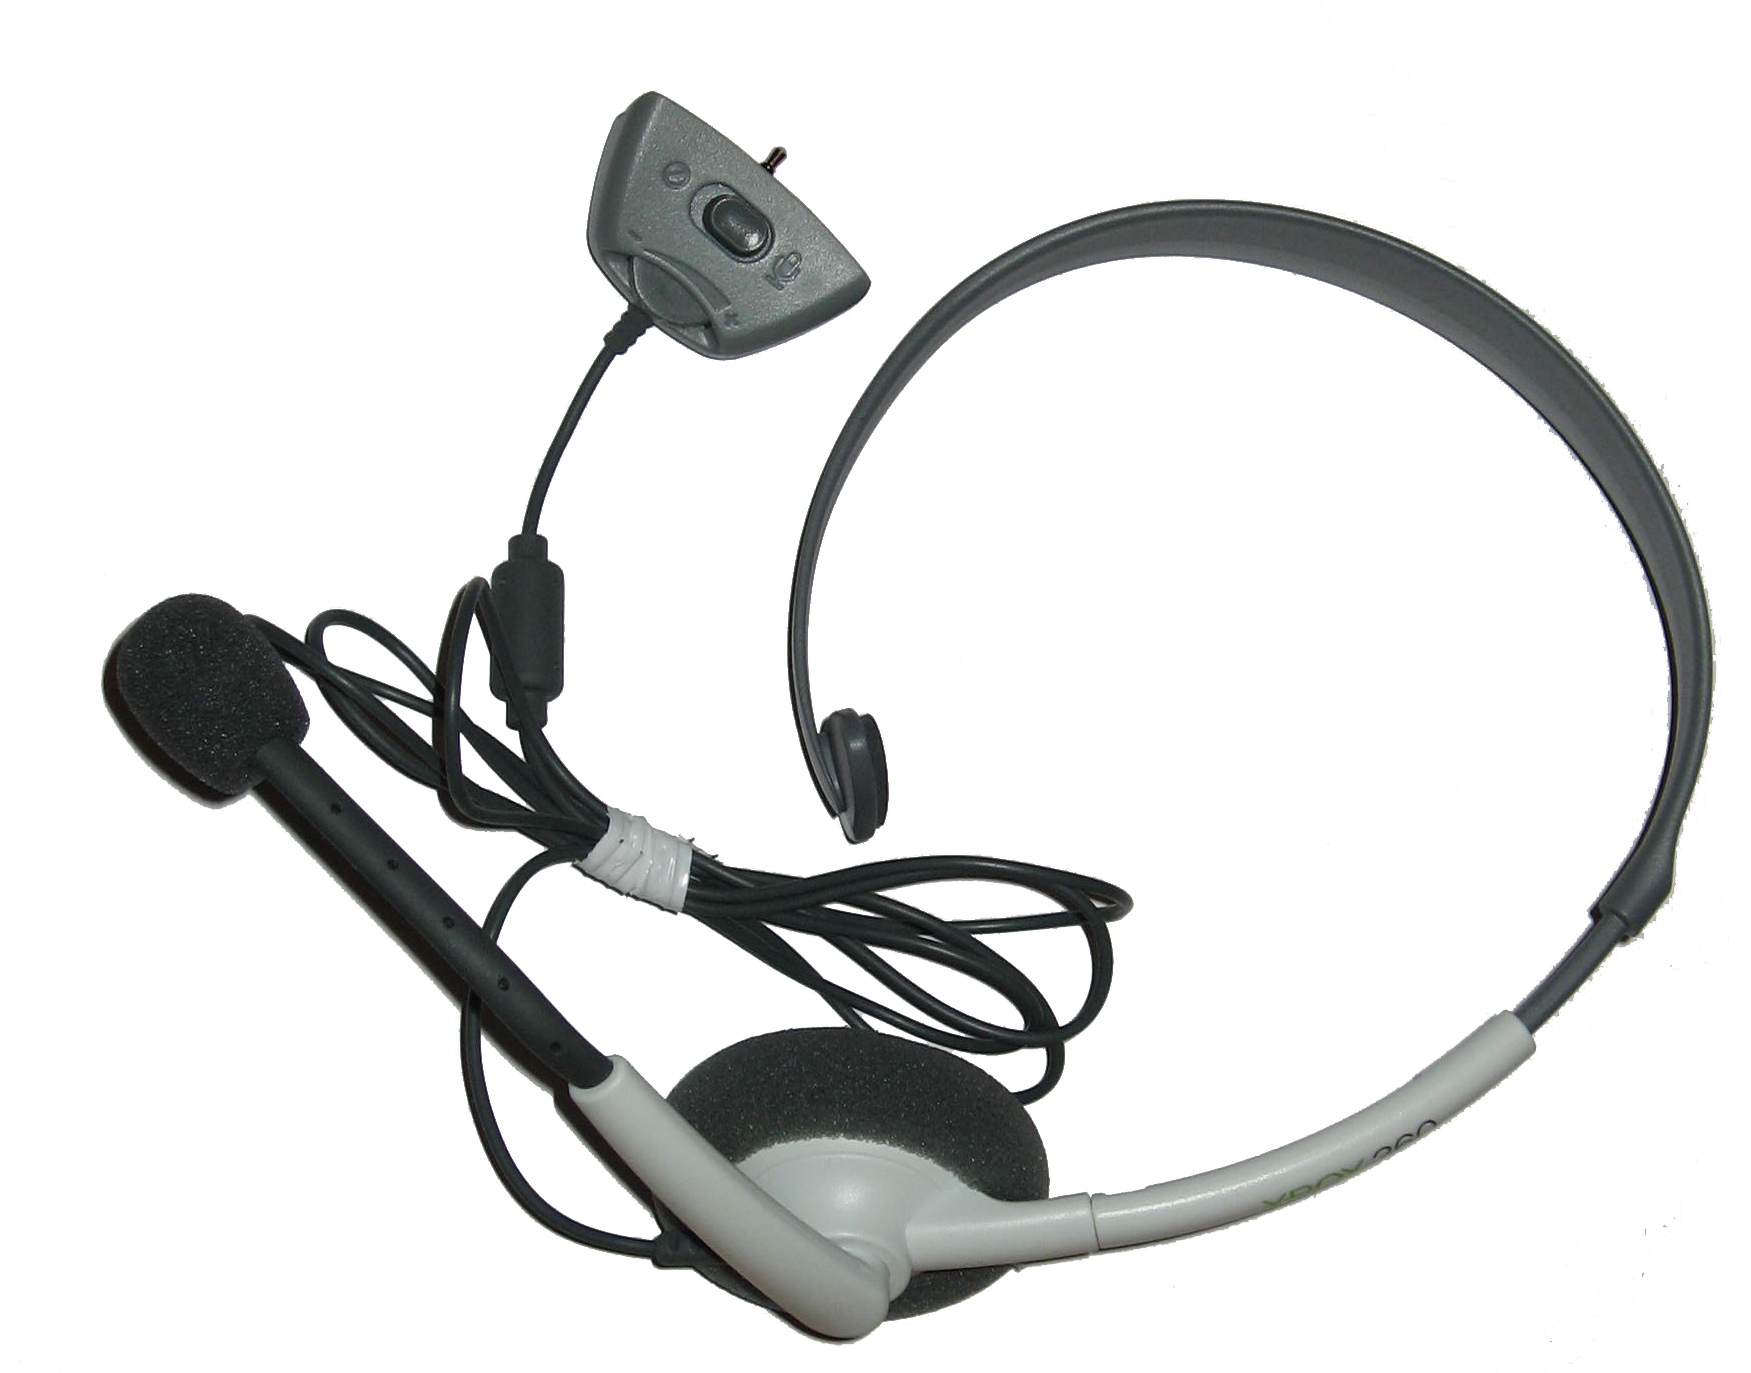 Wired - Xbox 360 Wired Headset (1792x1388)